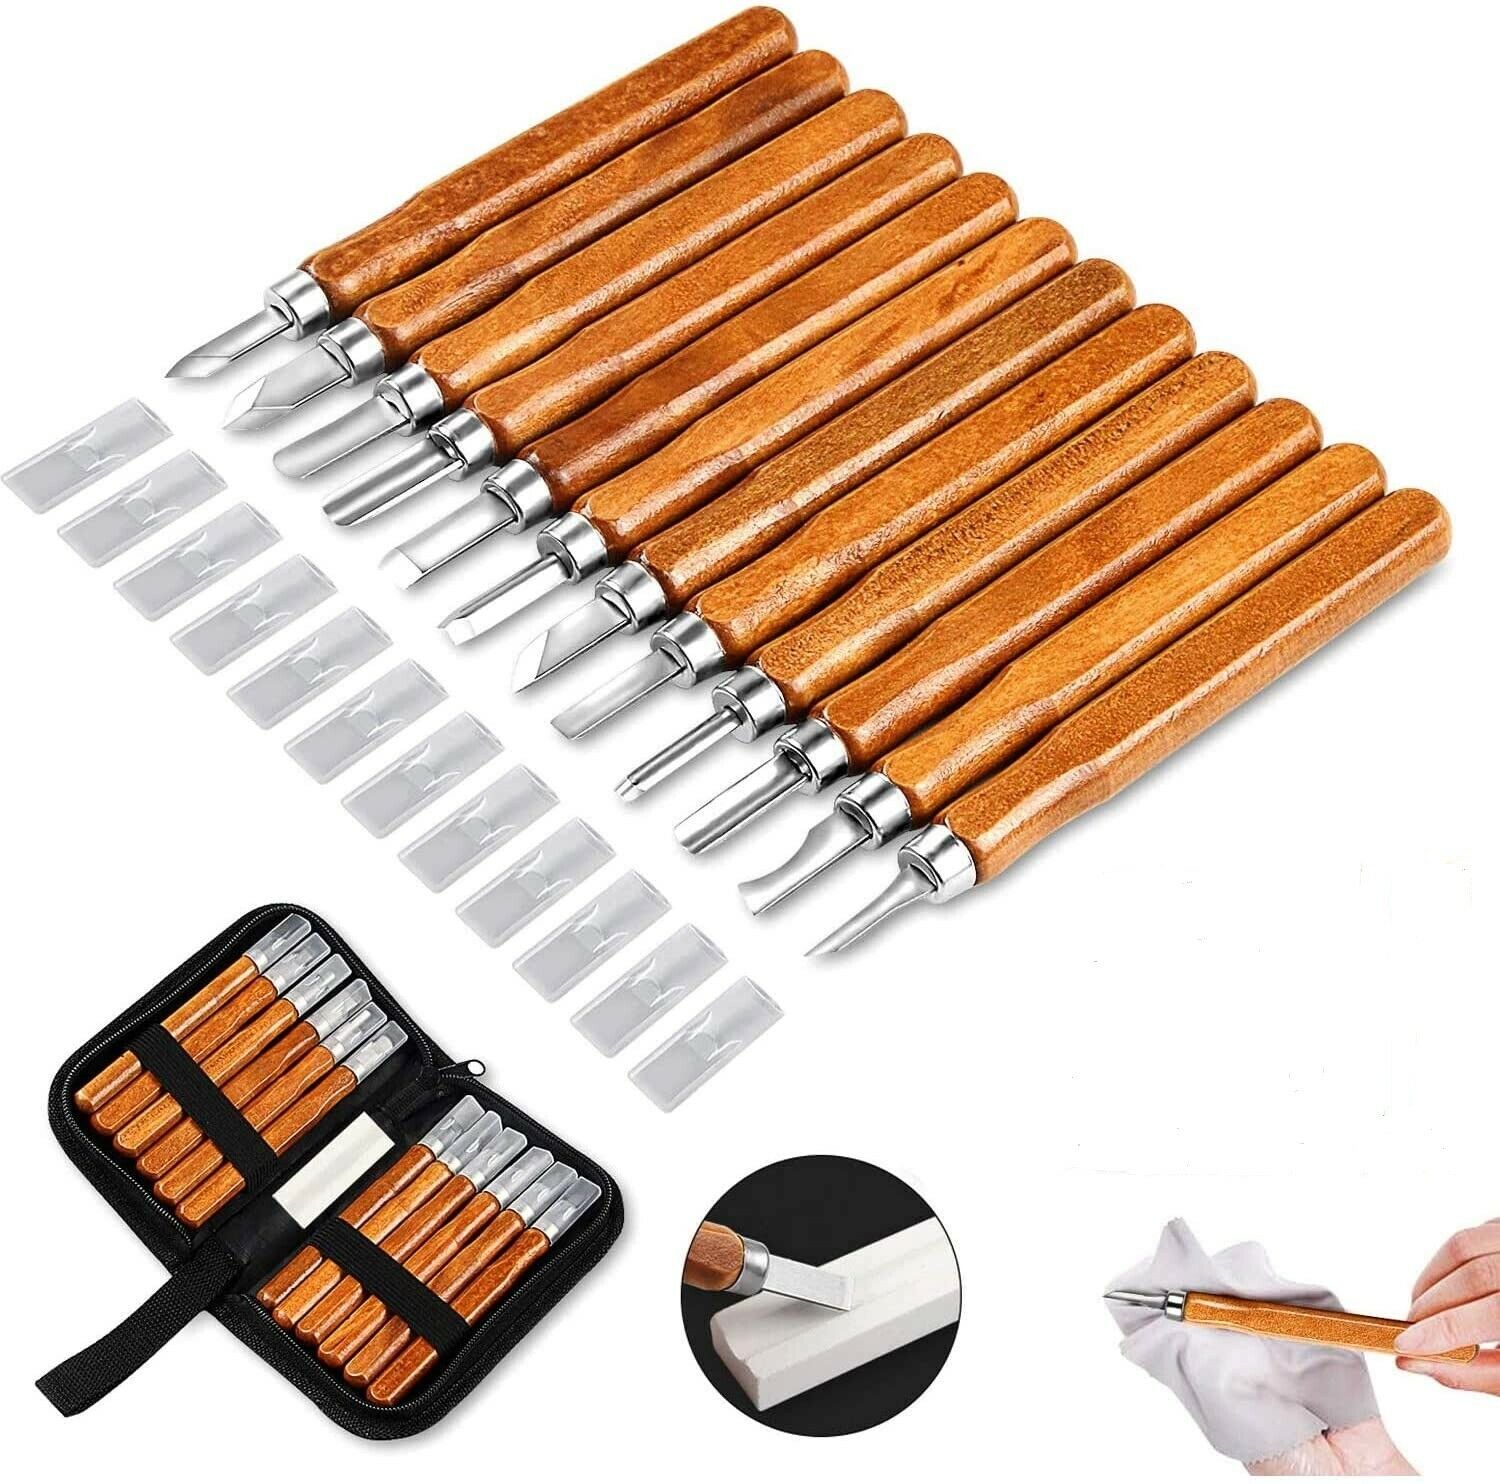 Wood Carving Tools 12 Set Sk2 Carbon Steel Sculpting Knife Kit For Professions